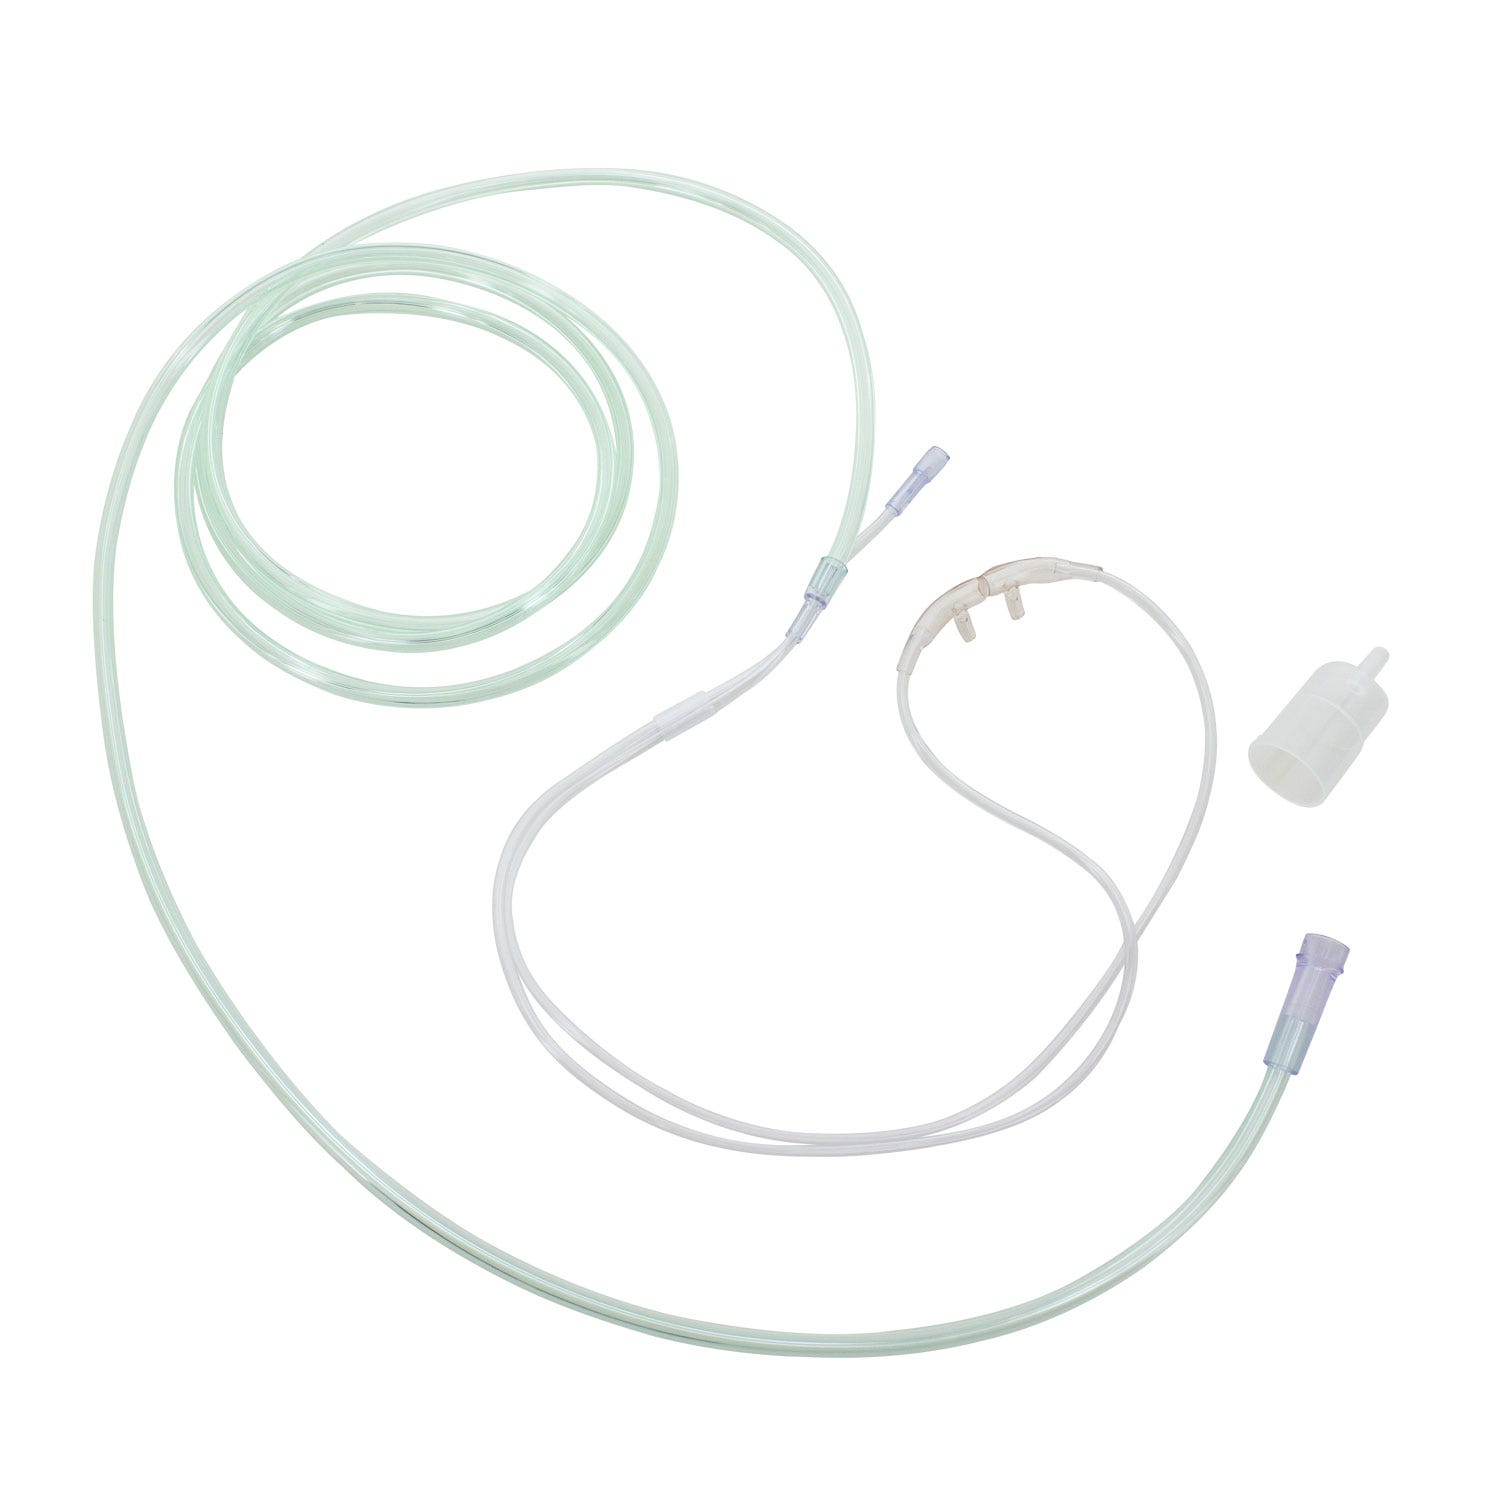 Adult Cannula, Divided w/ 7' O2 Line and 2" CO2 Line, and Female Luer-Lock Connector - 25/Case